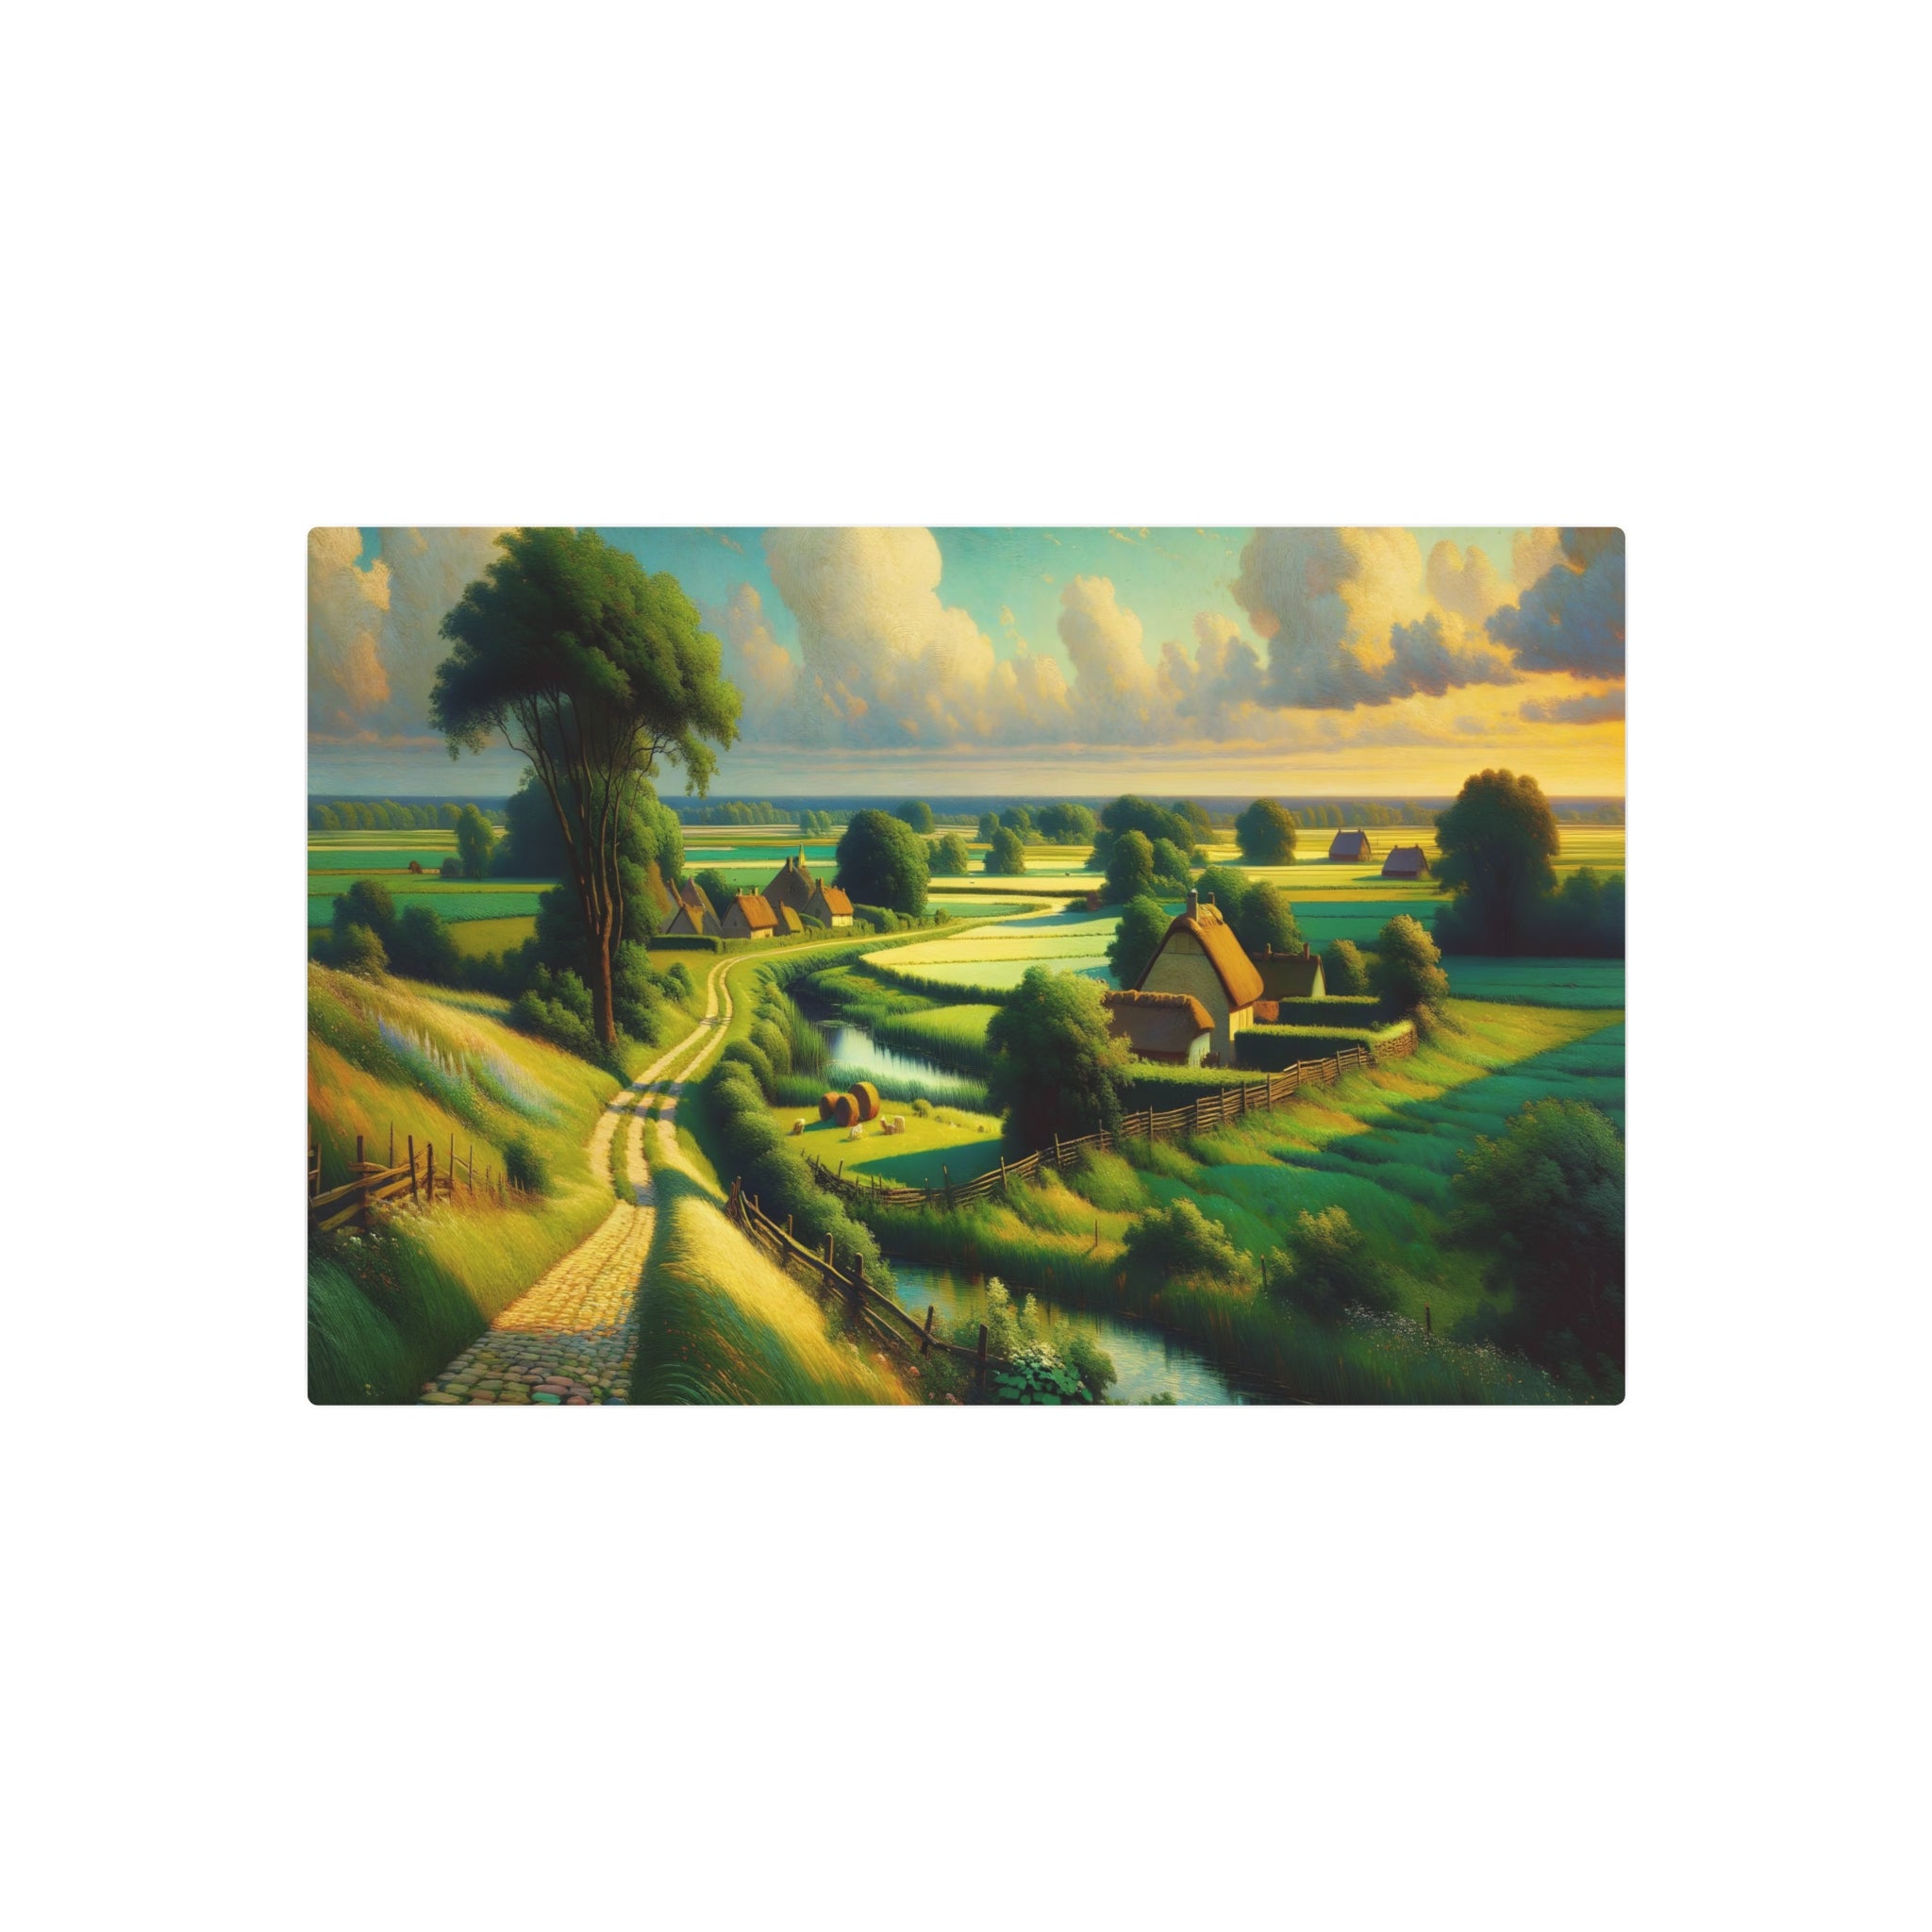 Metal Poster Art | "Post-Impressionist Art - Vibrant and Peaceful Countryside Landscape with Emphasis on Light and Movement - Western Art Styles Collection"